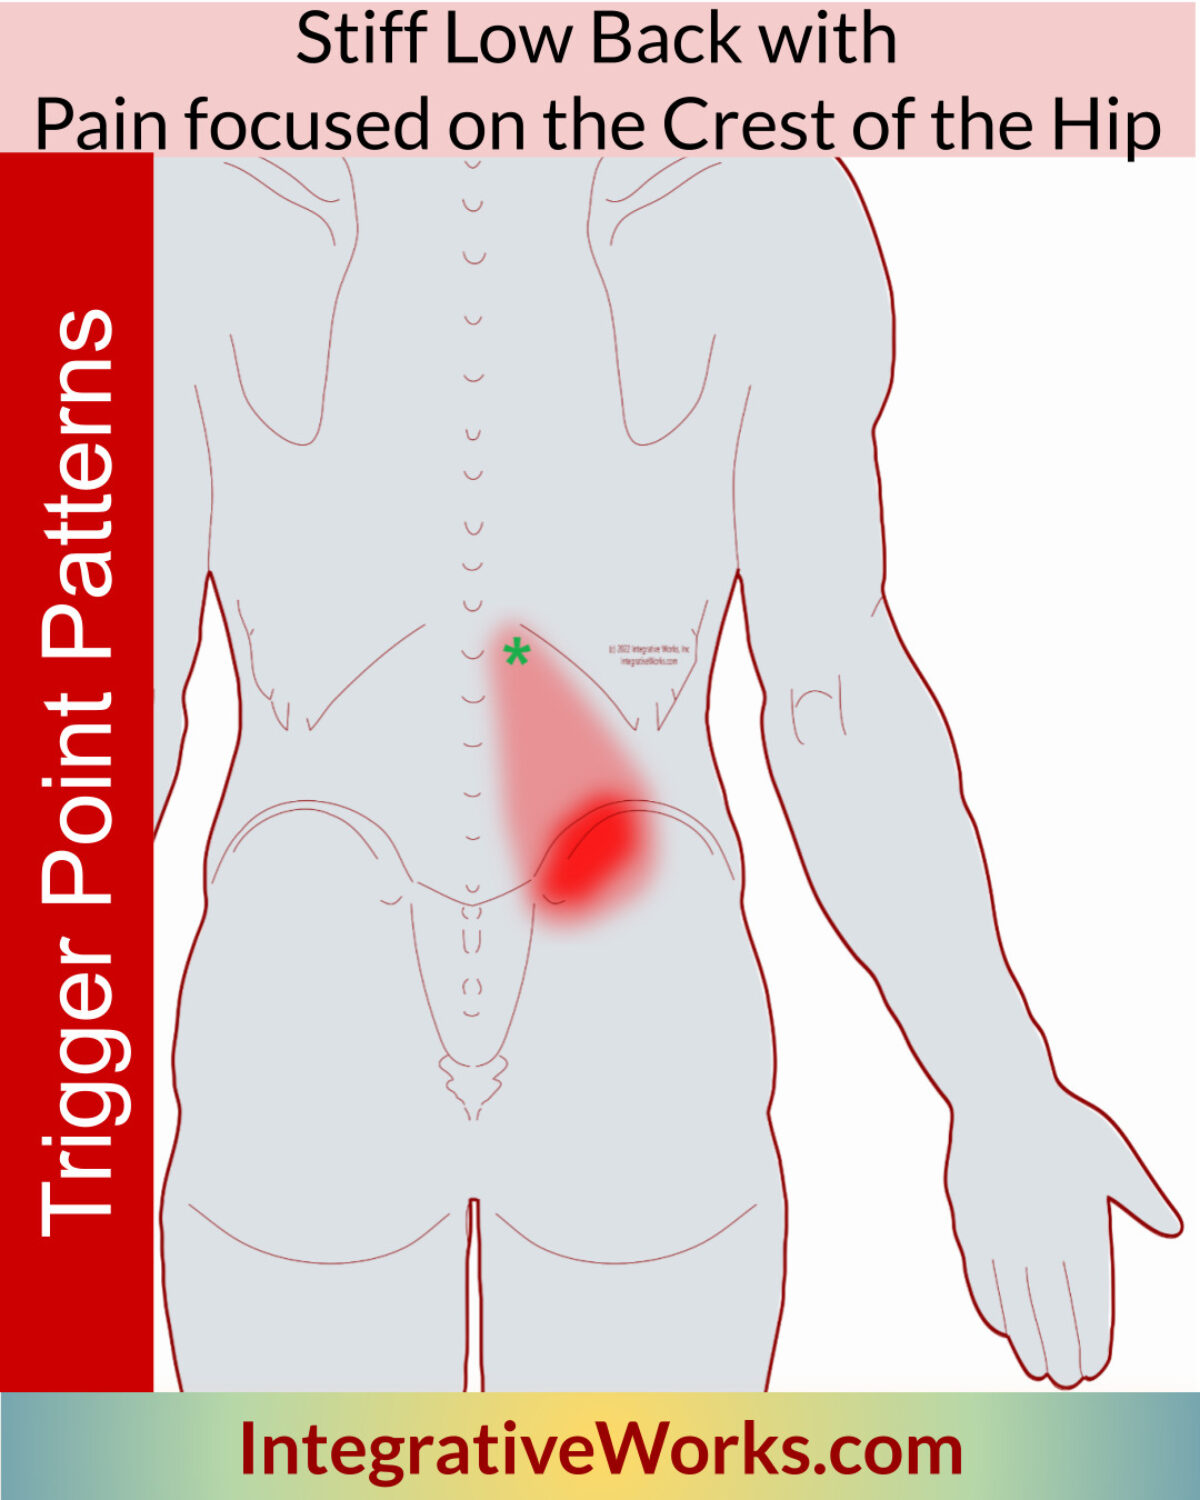 Understanding the Low Back Pain Trigger Points